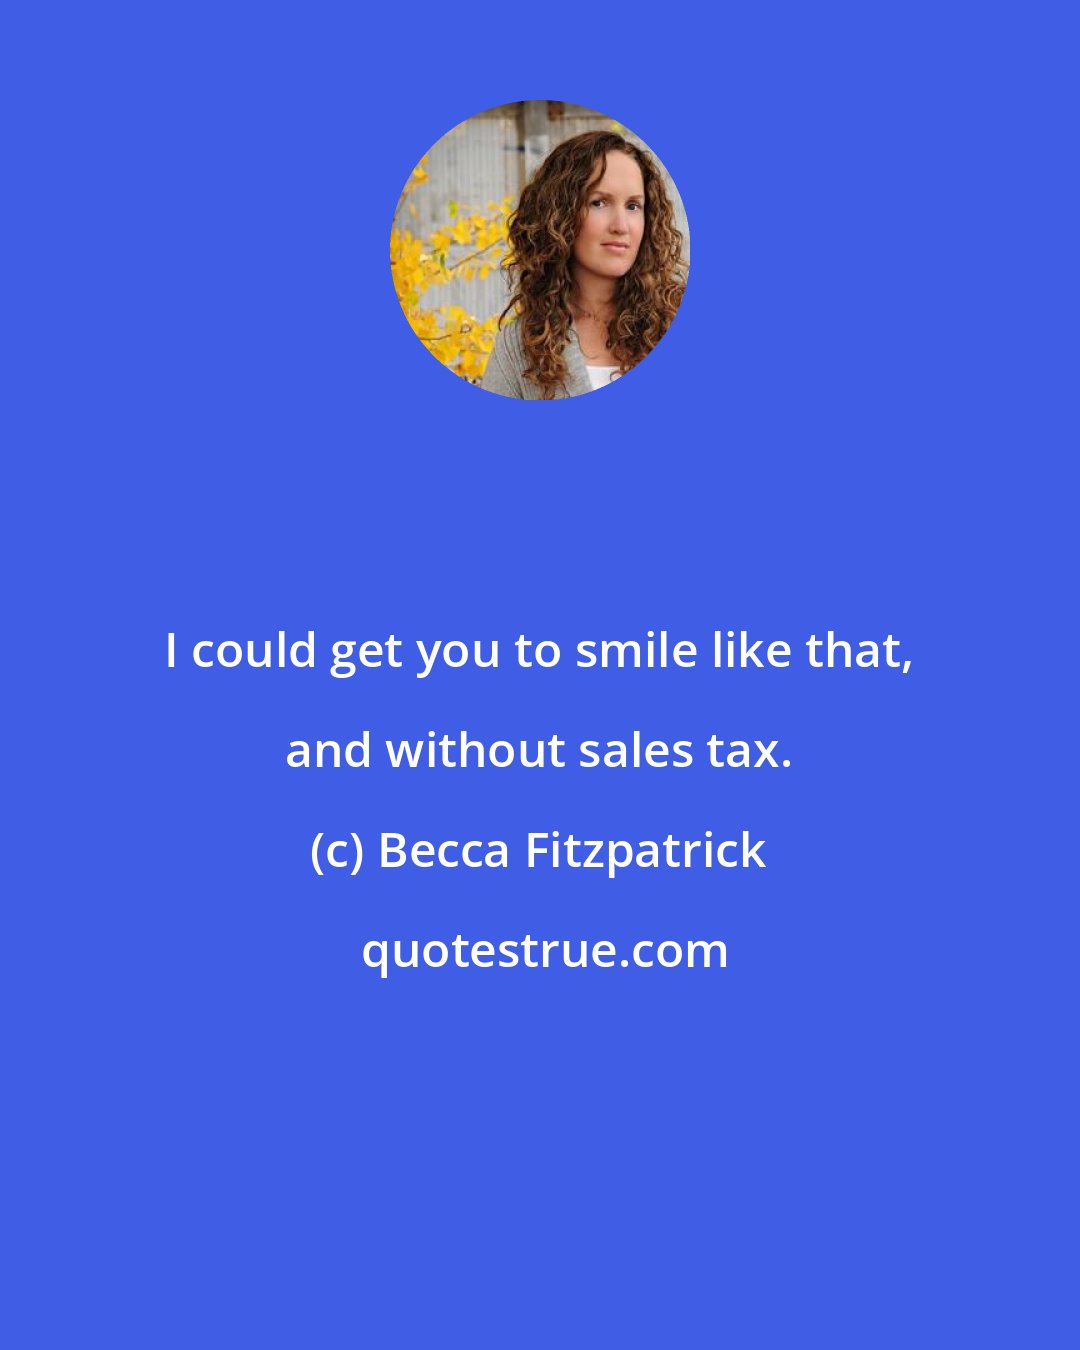 Becca Fitzpatrick: I could get you to smile like that, and without sales tax.